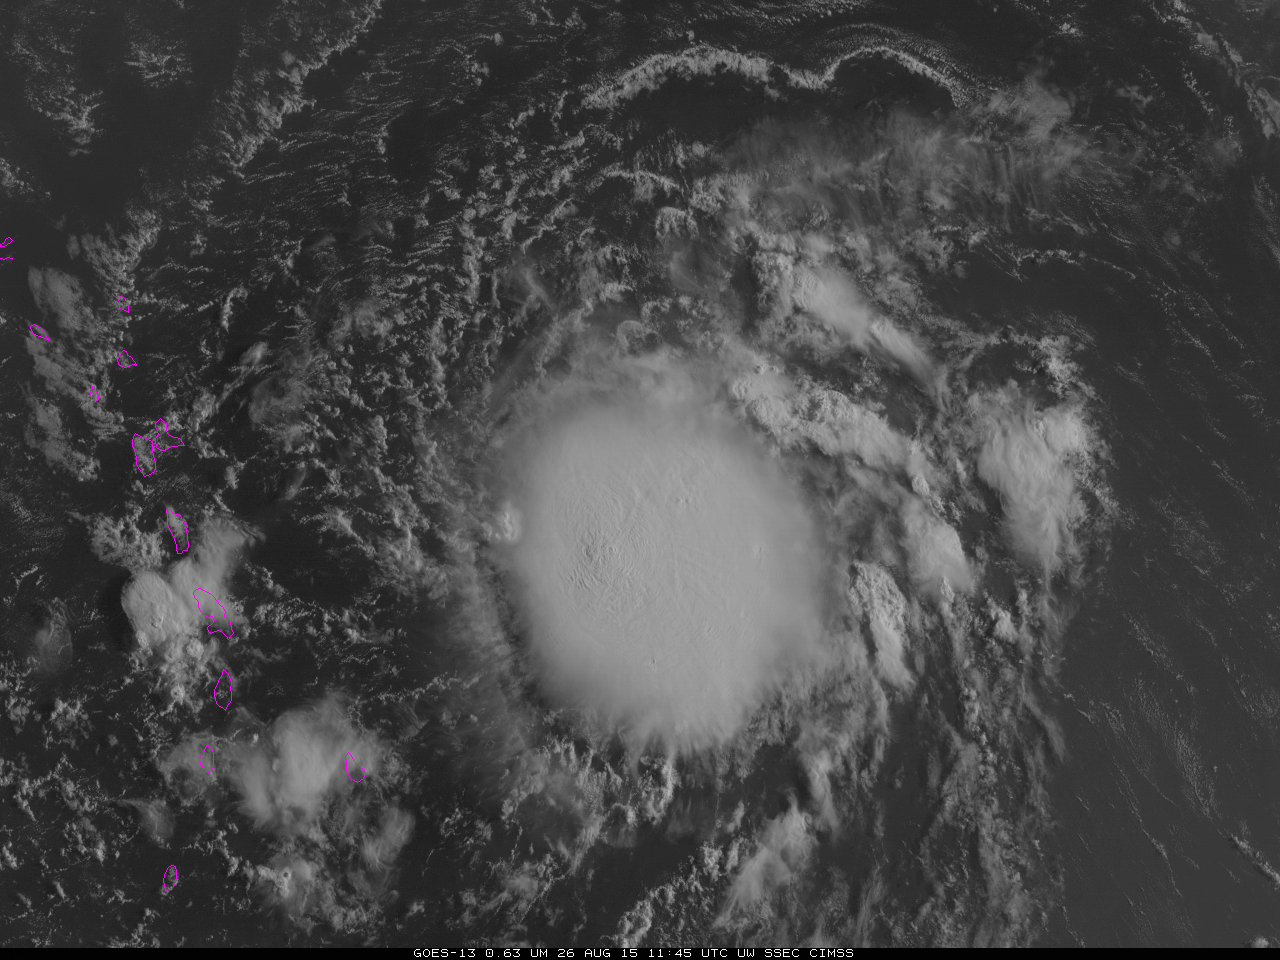 GOES-13 Visible Imagery (0.63 µm) [click to play animated GIF]